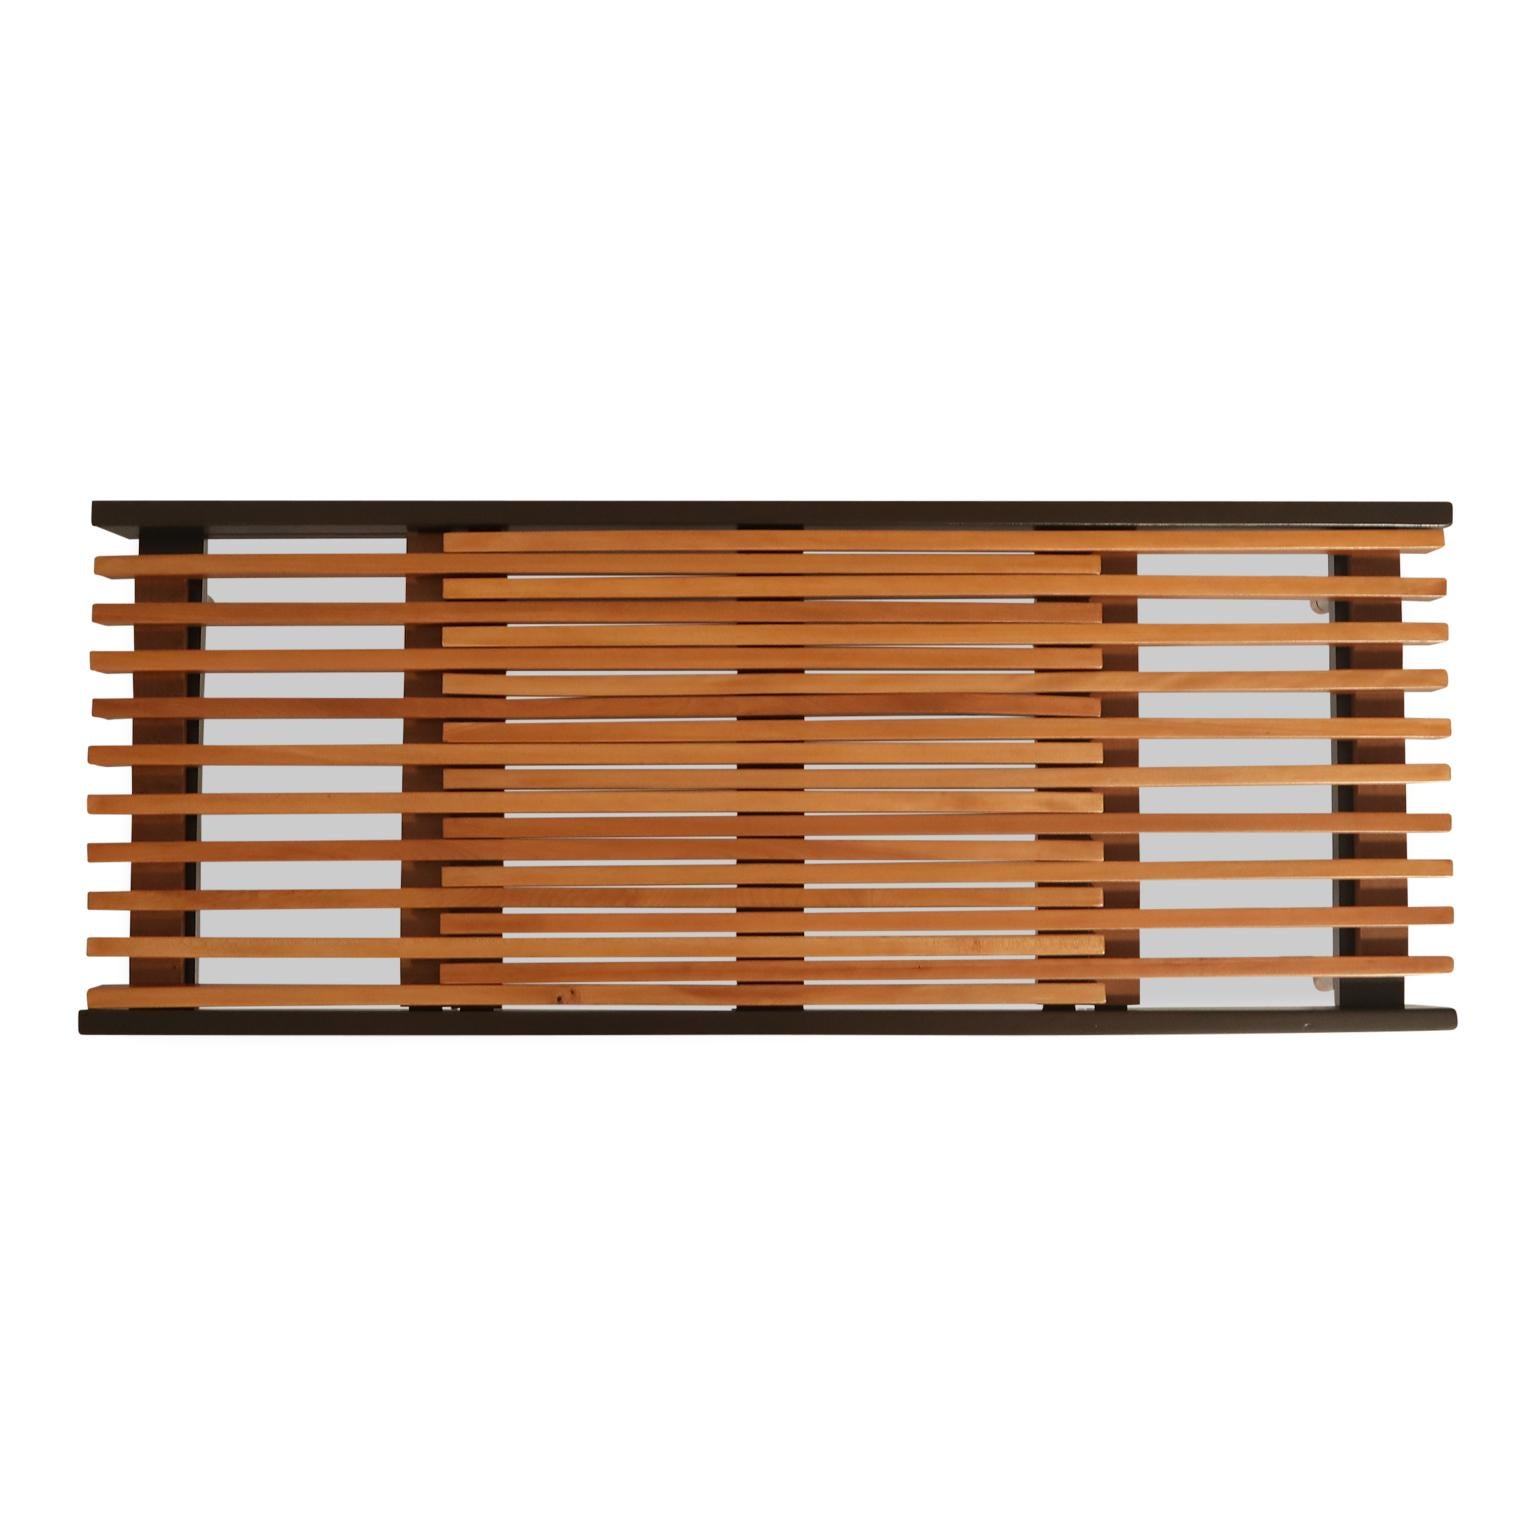 Japanese Extendable Slatted Wood Bench or Coffee Table by Maruni, 1950s Hiroshima Japan